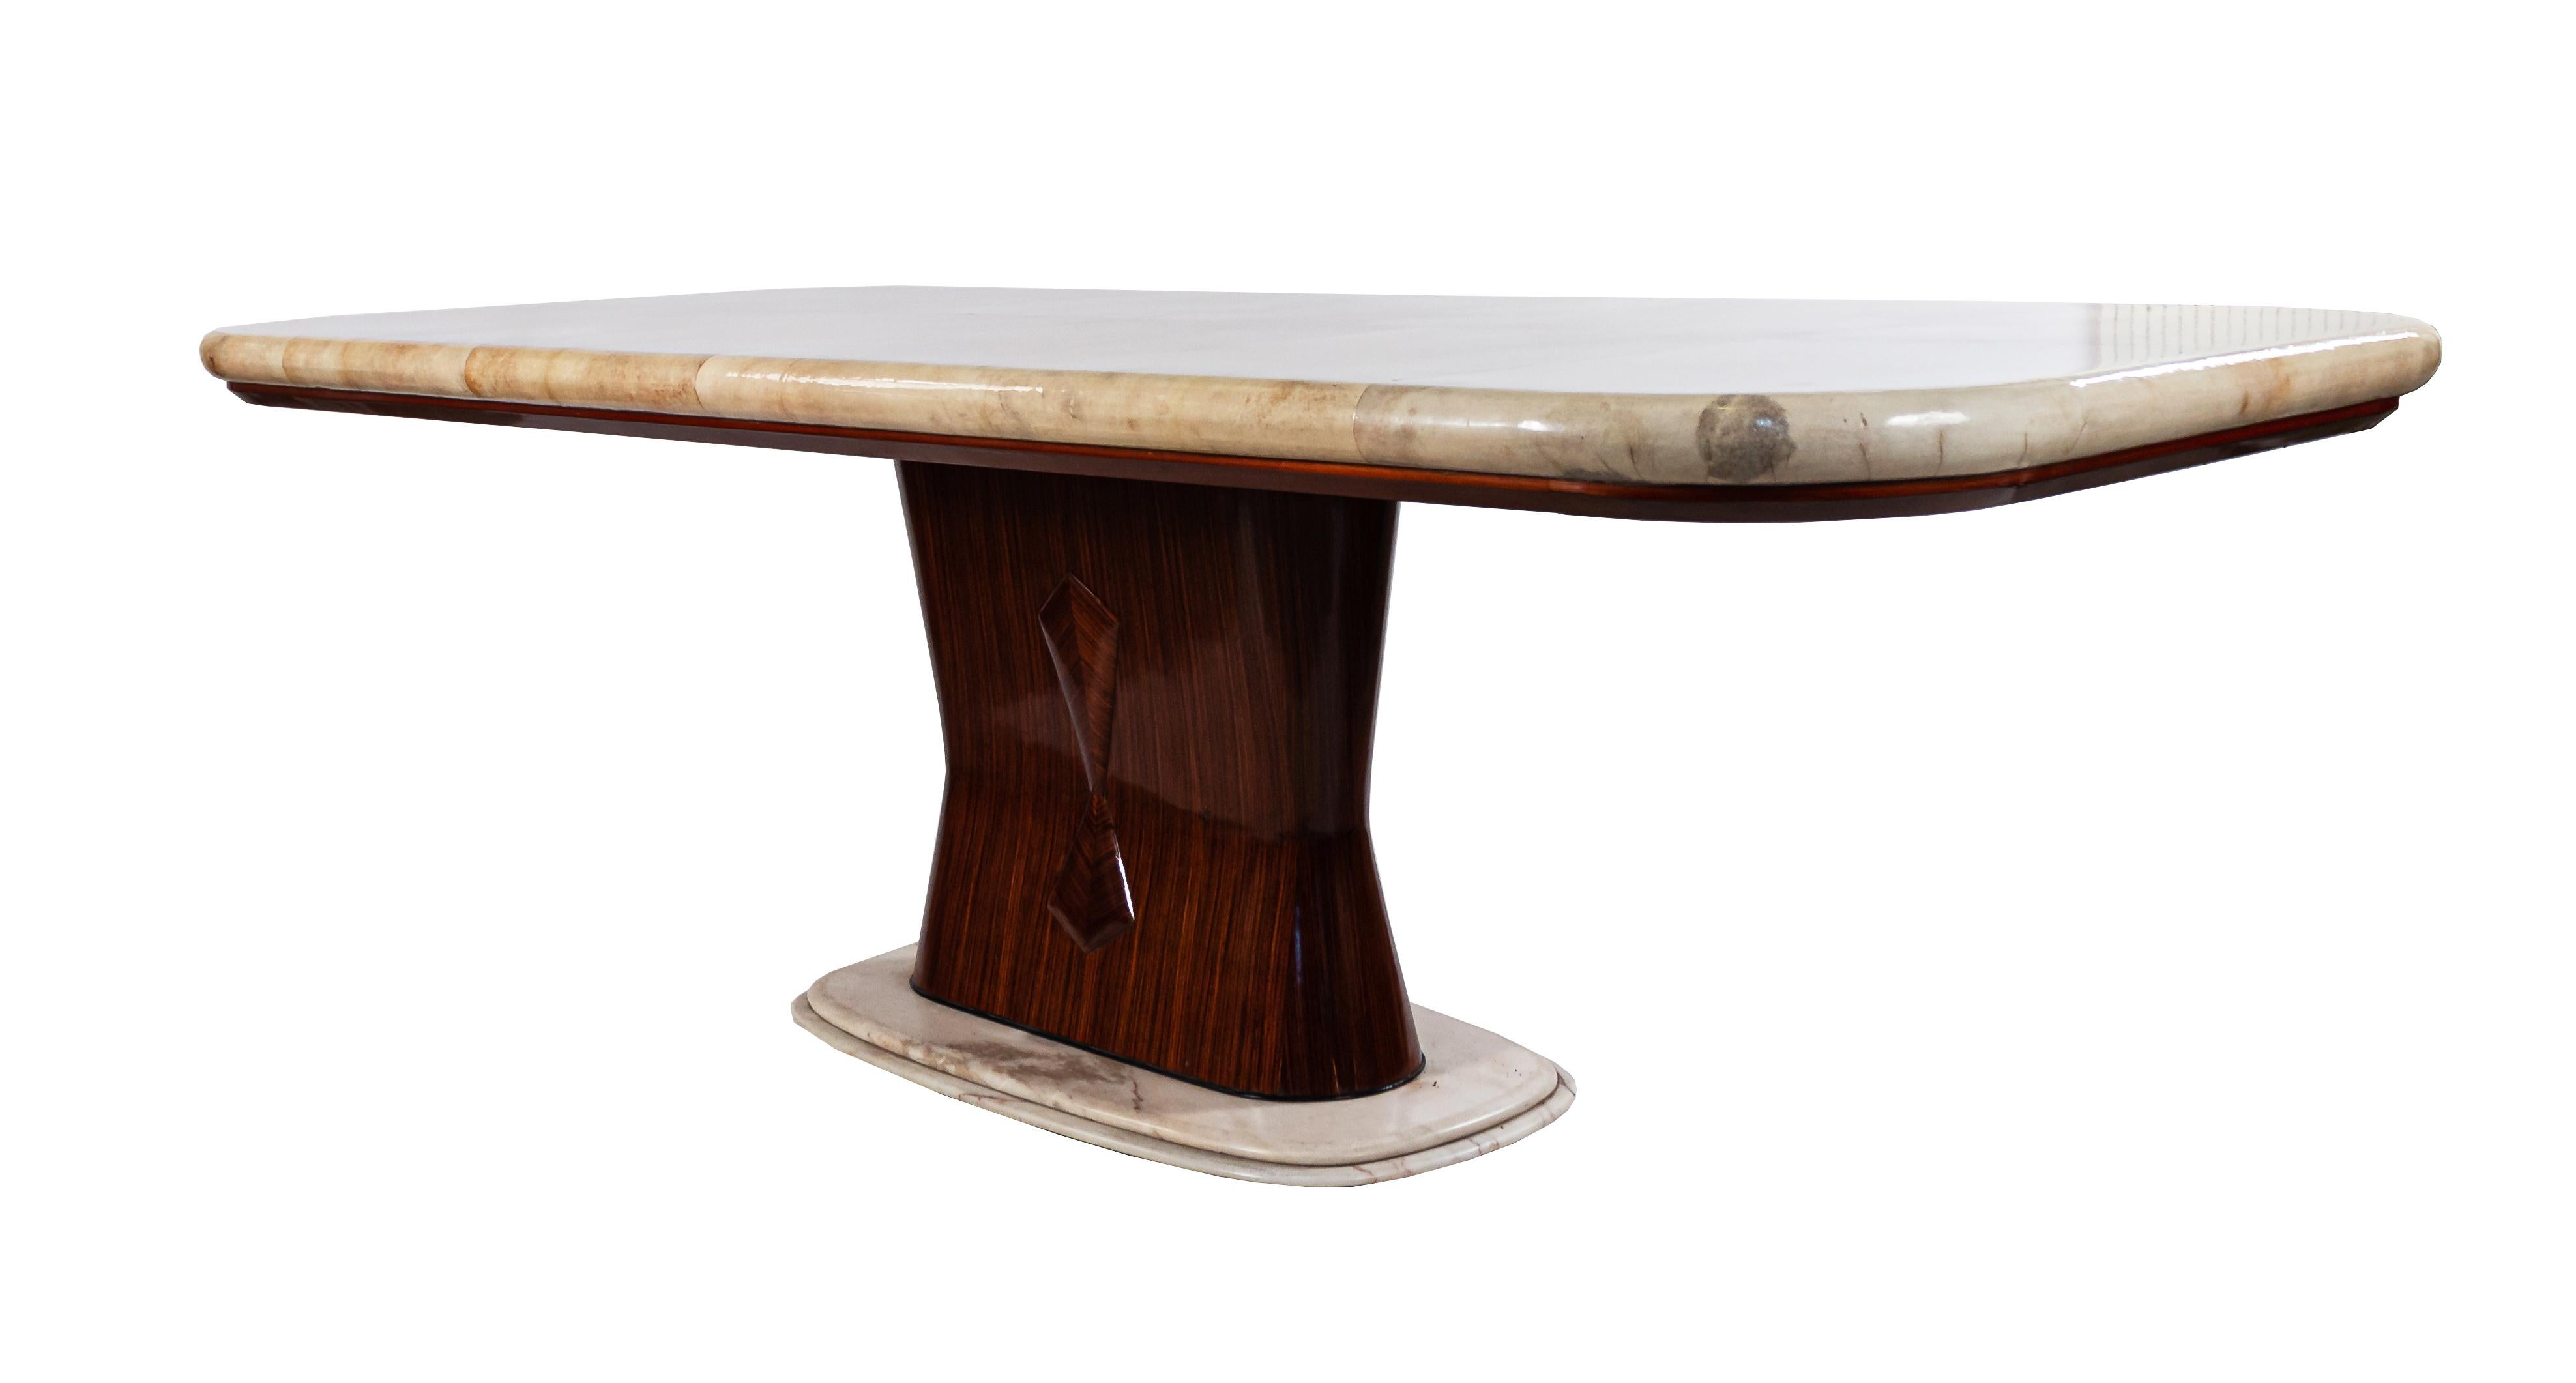 Italian midcentury dining table with a parchment top having rounded corners on an hourglass-shaped rosewood pedestal base with carved diamond detail on an oval white marble foot (attributed Vittorio Dassi).